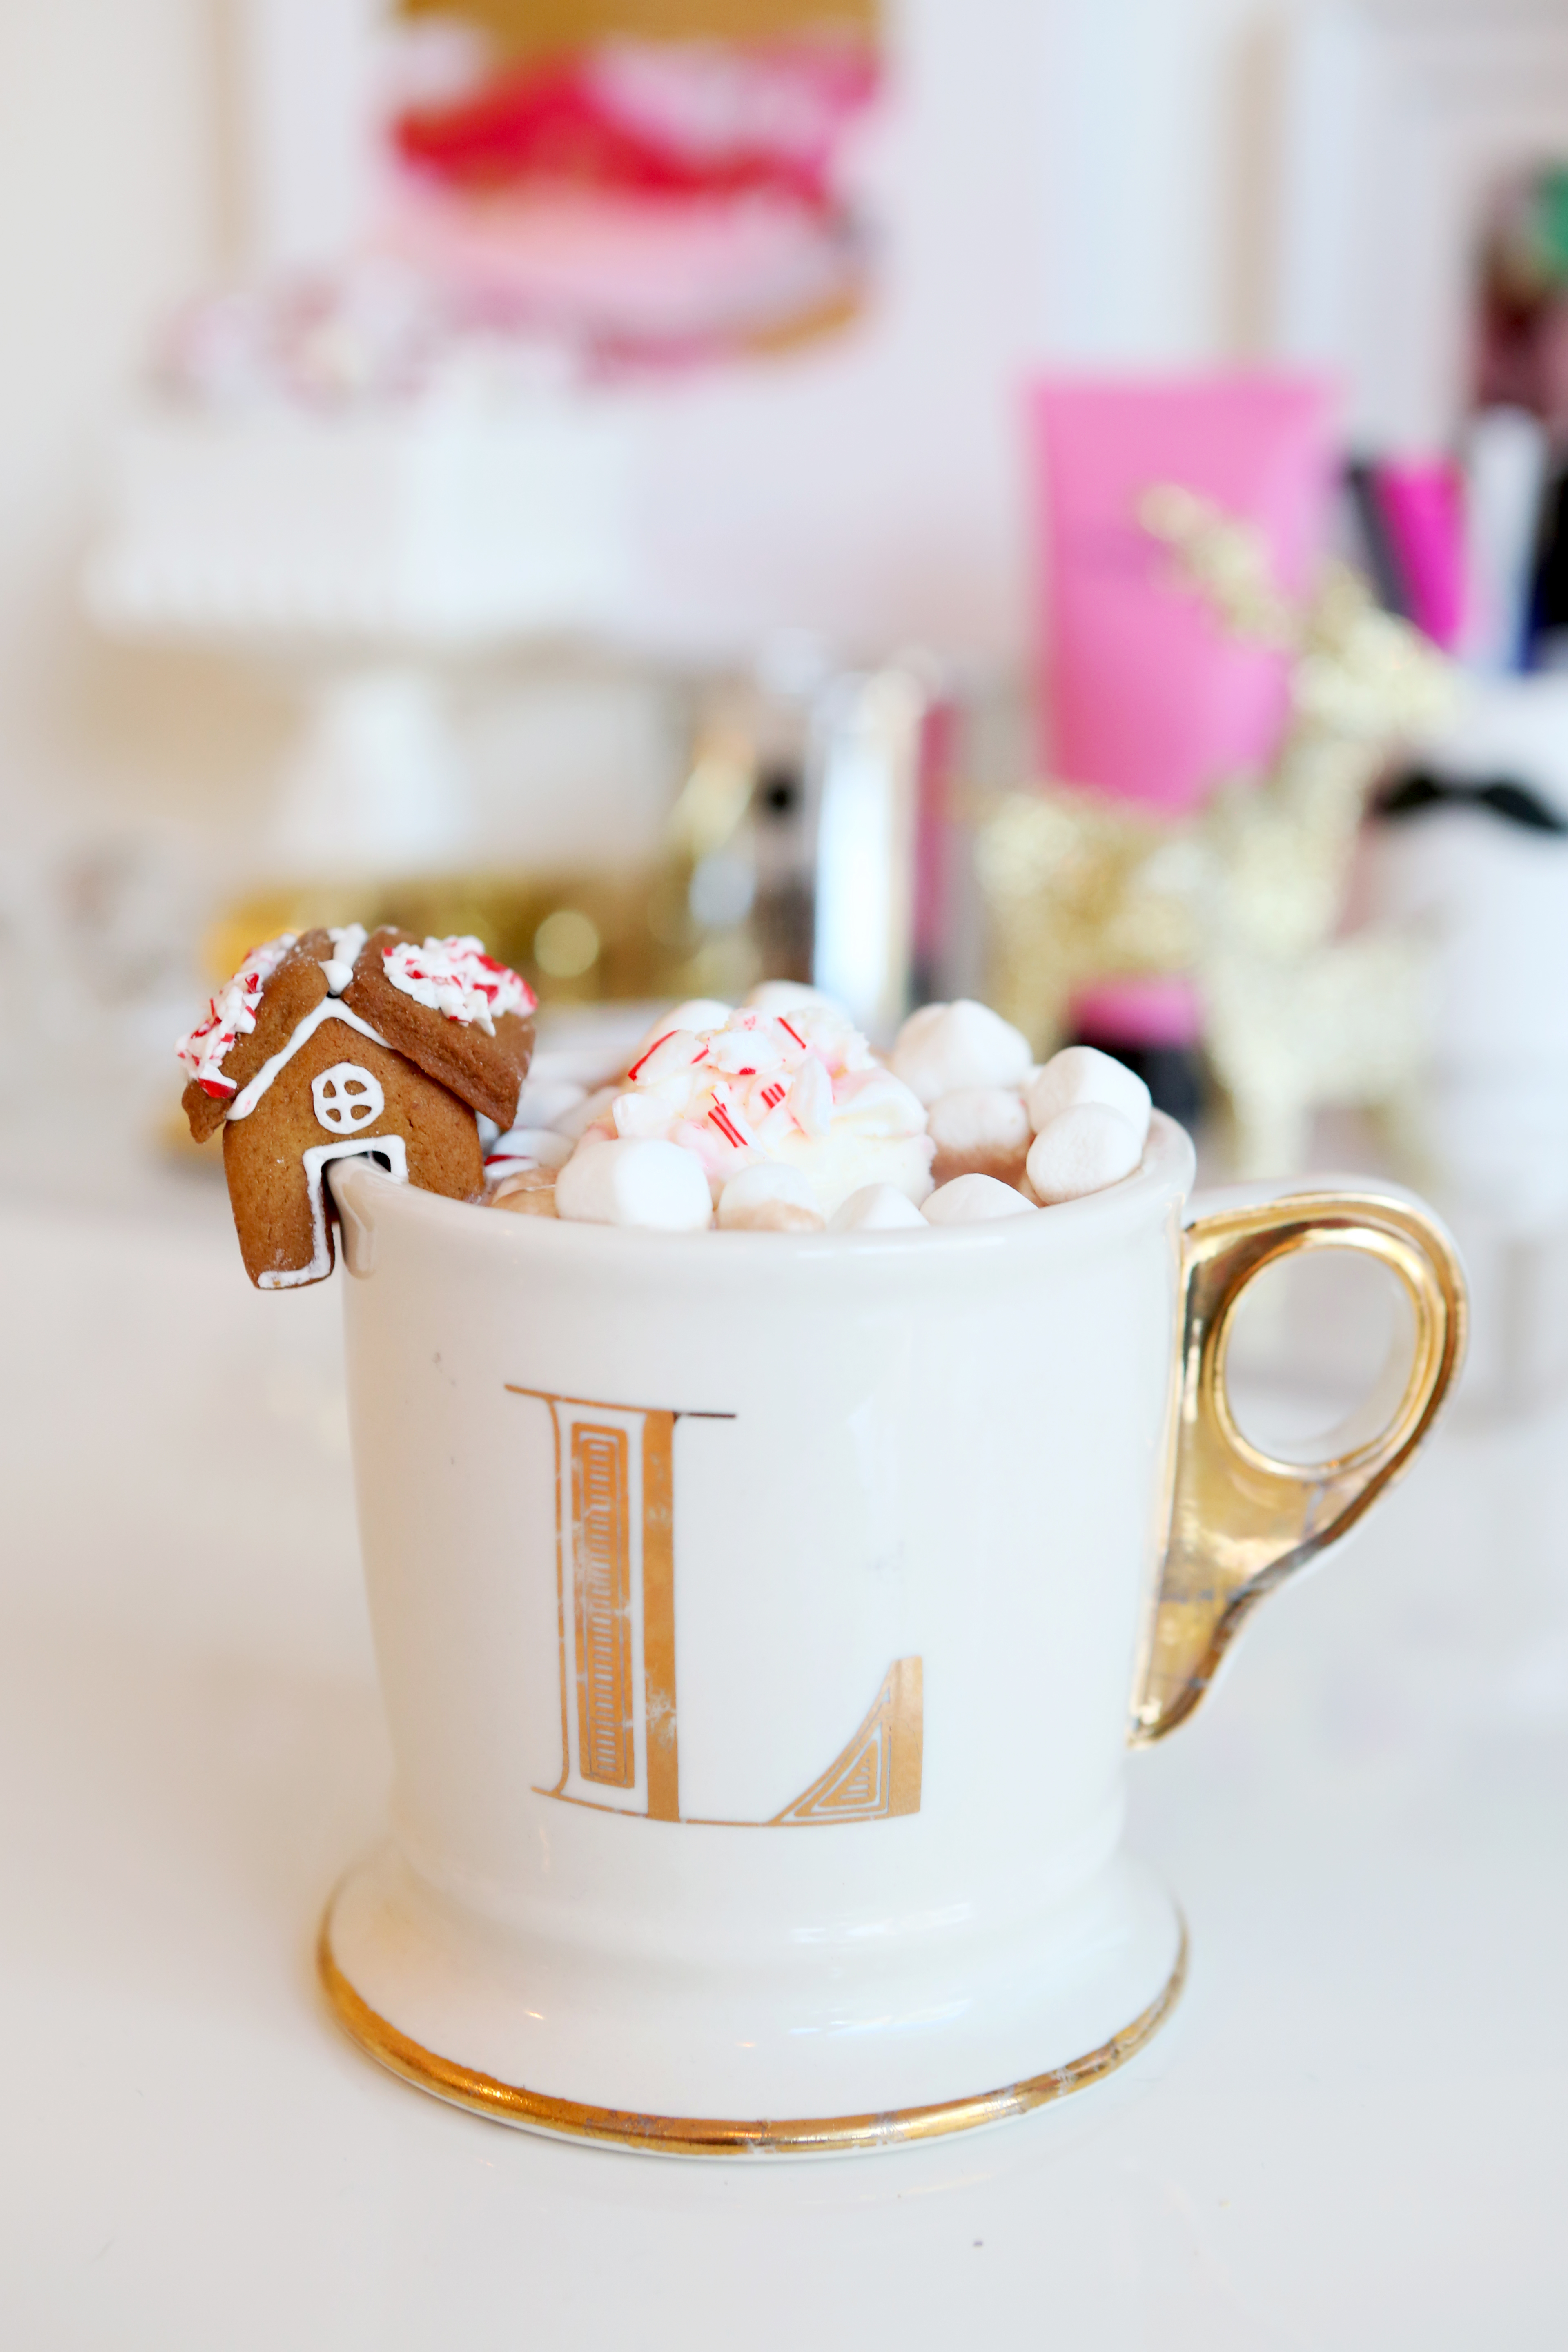 Hot Chocolate Anthro Style_Mini Ginerbread House4